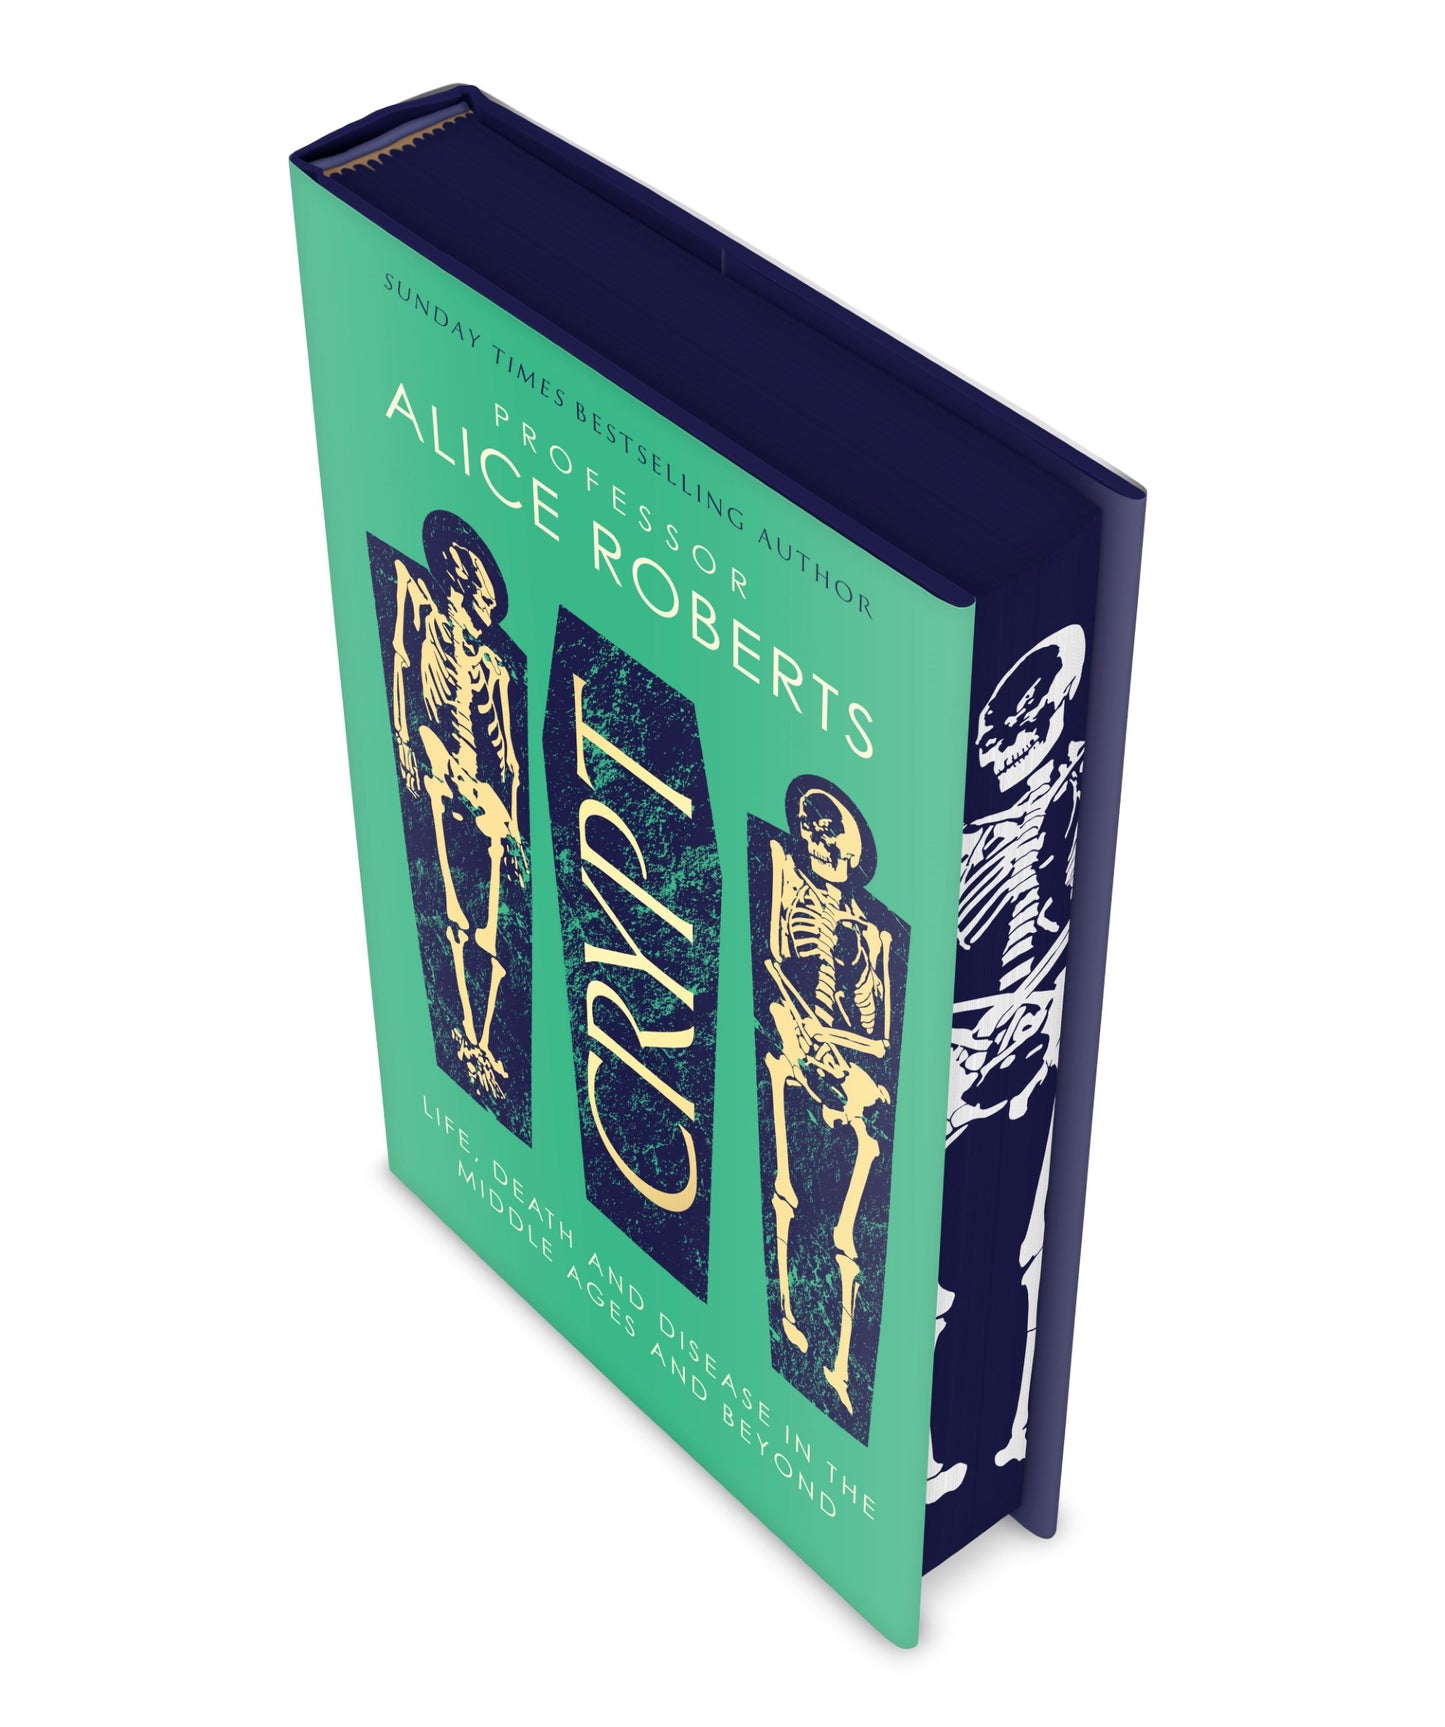 PRE-ORDER Crypt - Alice Roberts | SIGNED SPECIAL EDITION